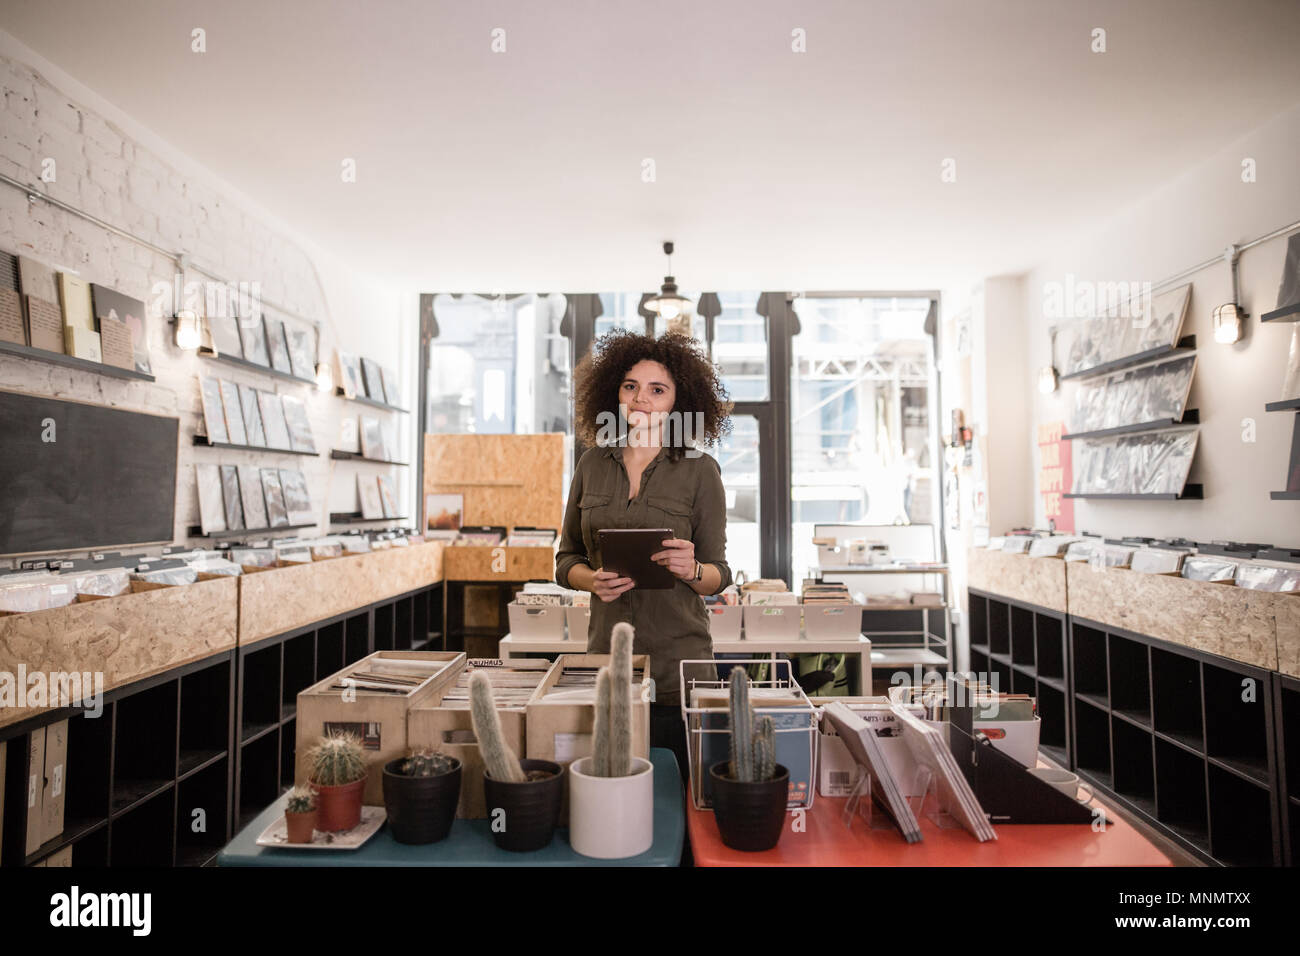 Portrait of small business owner Stock Photo